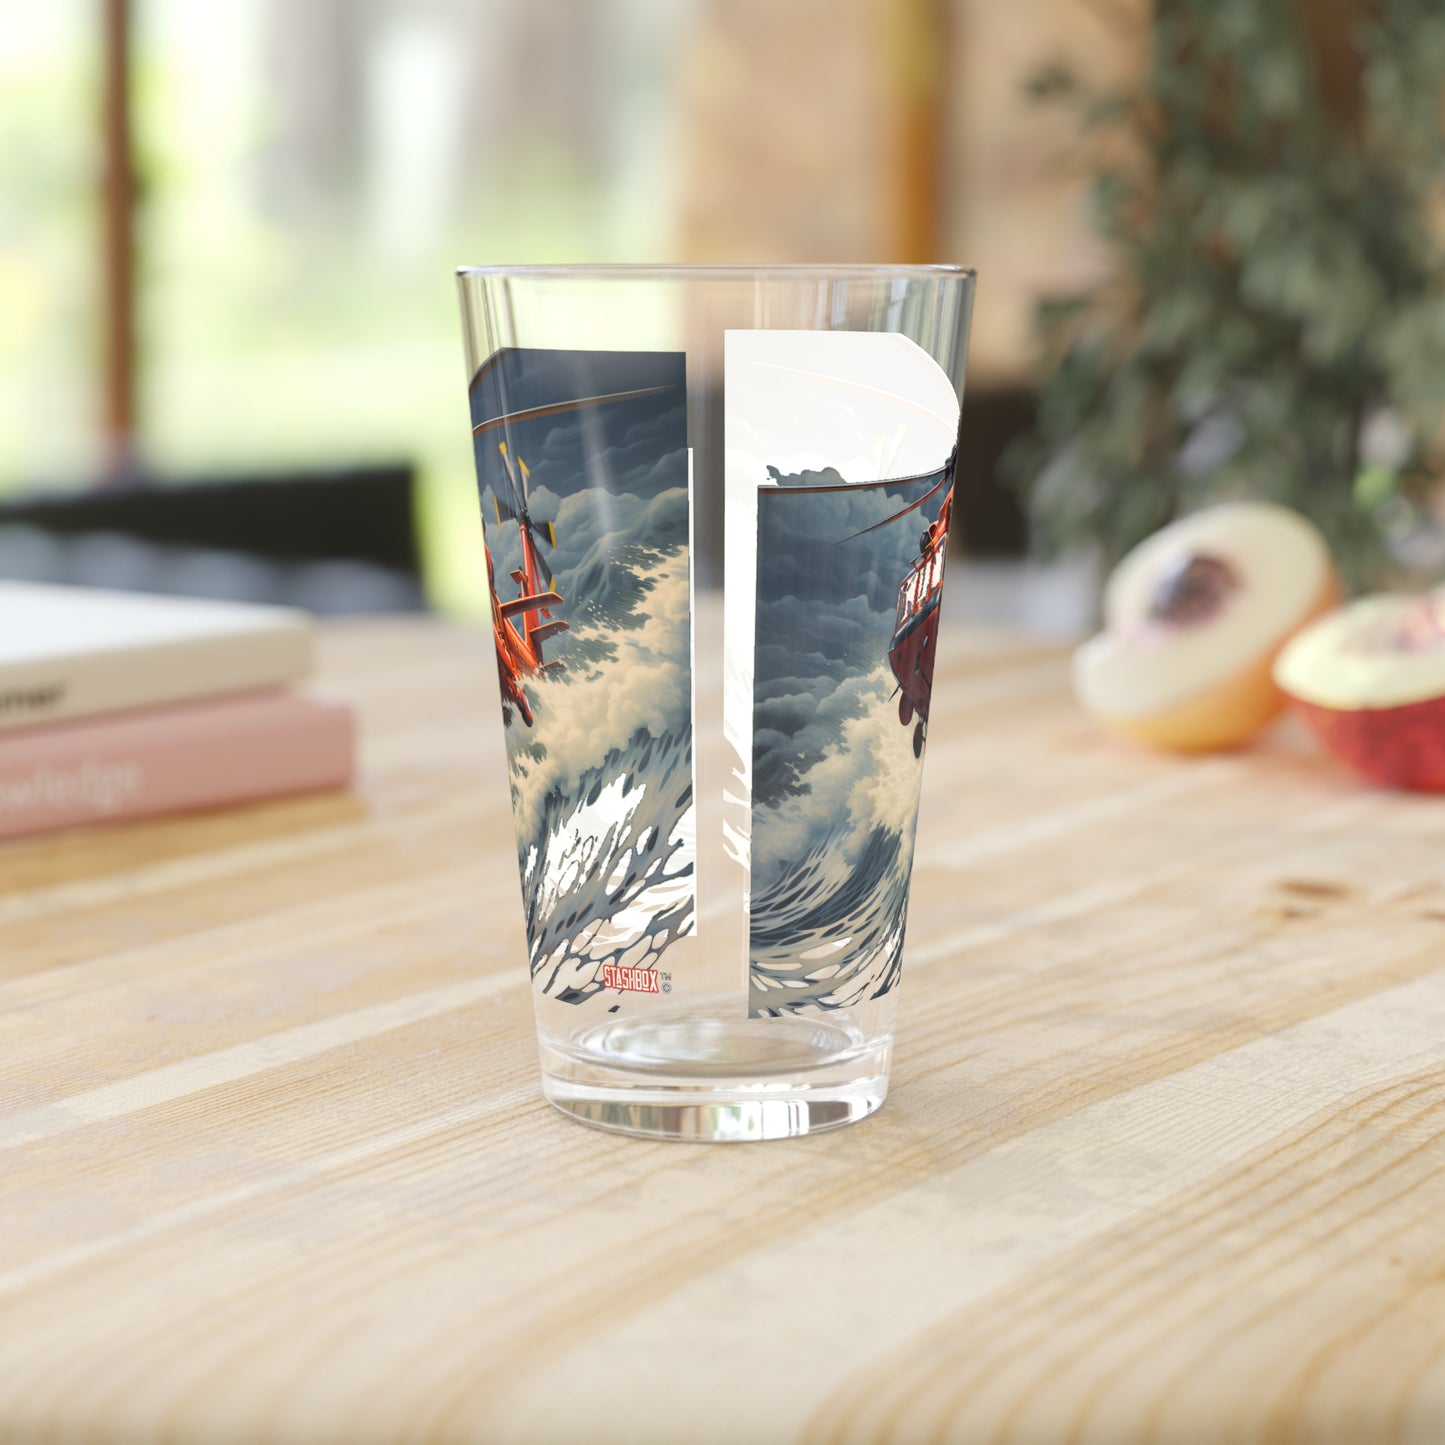 Pint Glass 16oz Helicopter Surfing Huge Ocean Wave 055